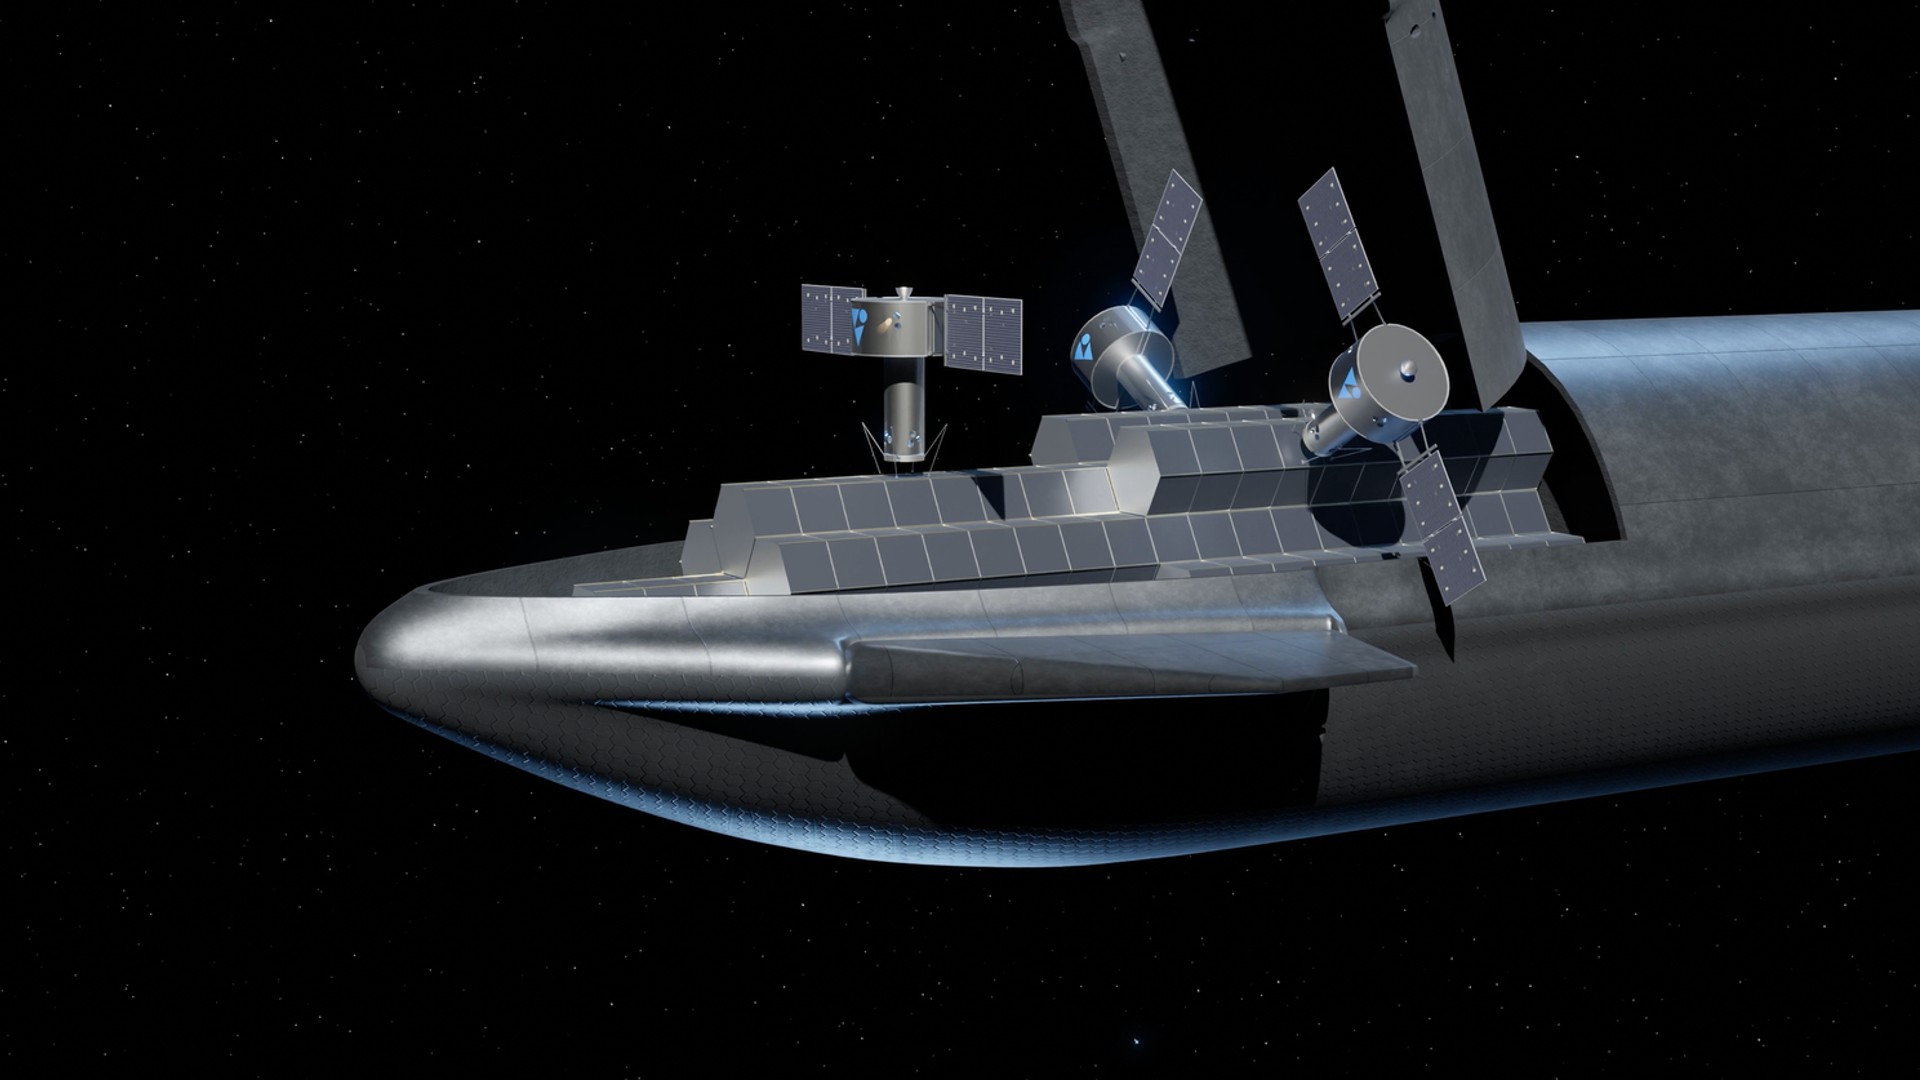 SpaceX’s Starship could help this start-up beam clean energy from space. Here’s how (video) Space